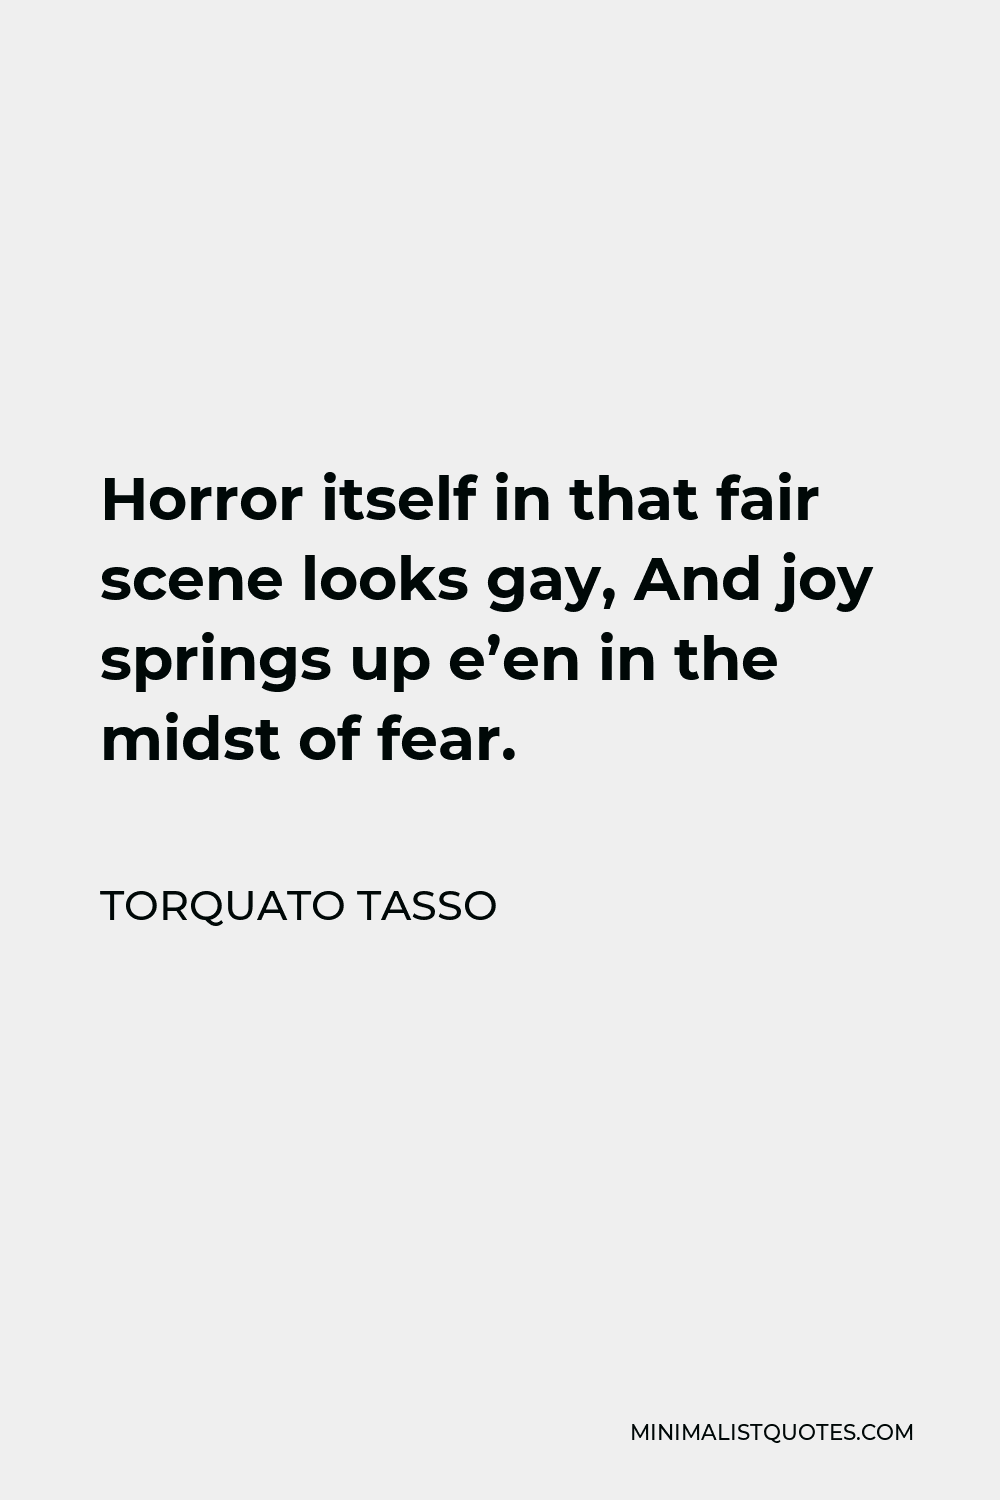 Torquato Tasso Quote - Horror itself in that fair scene looks gay, And joy springs up e’en in the midst of fear.